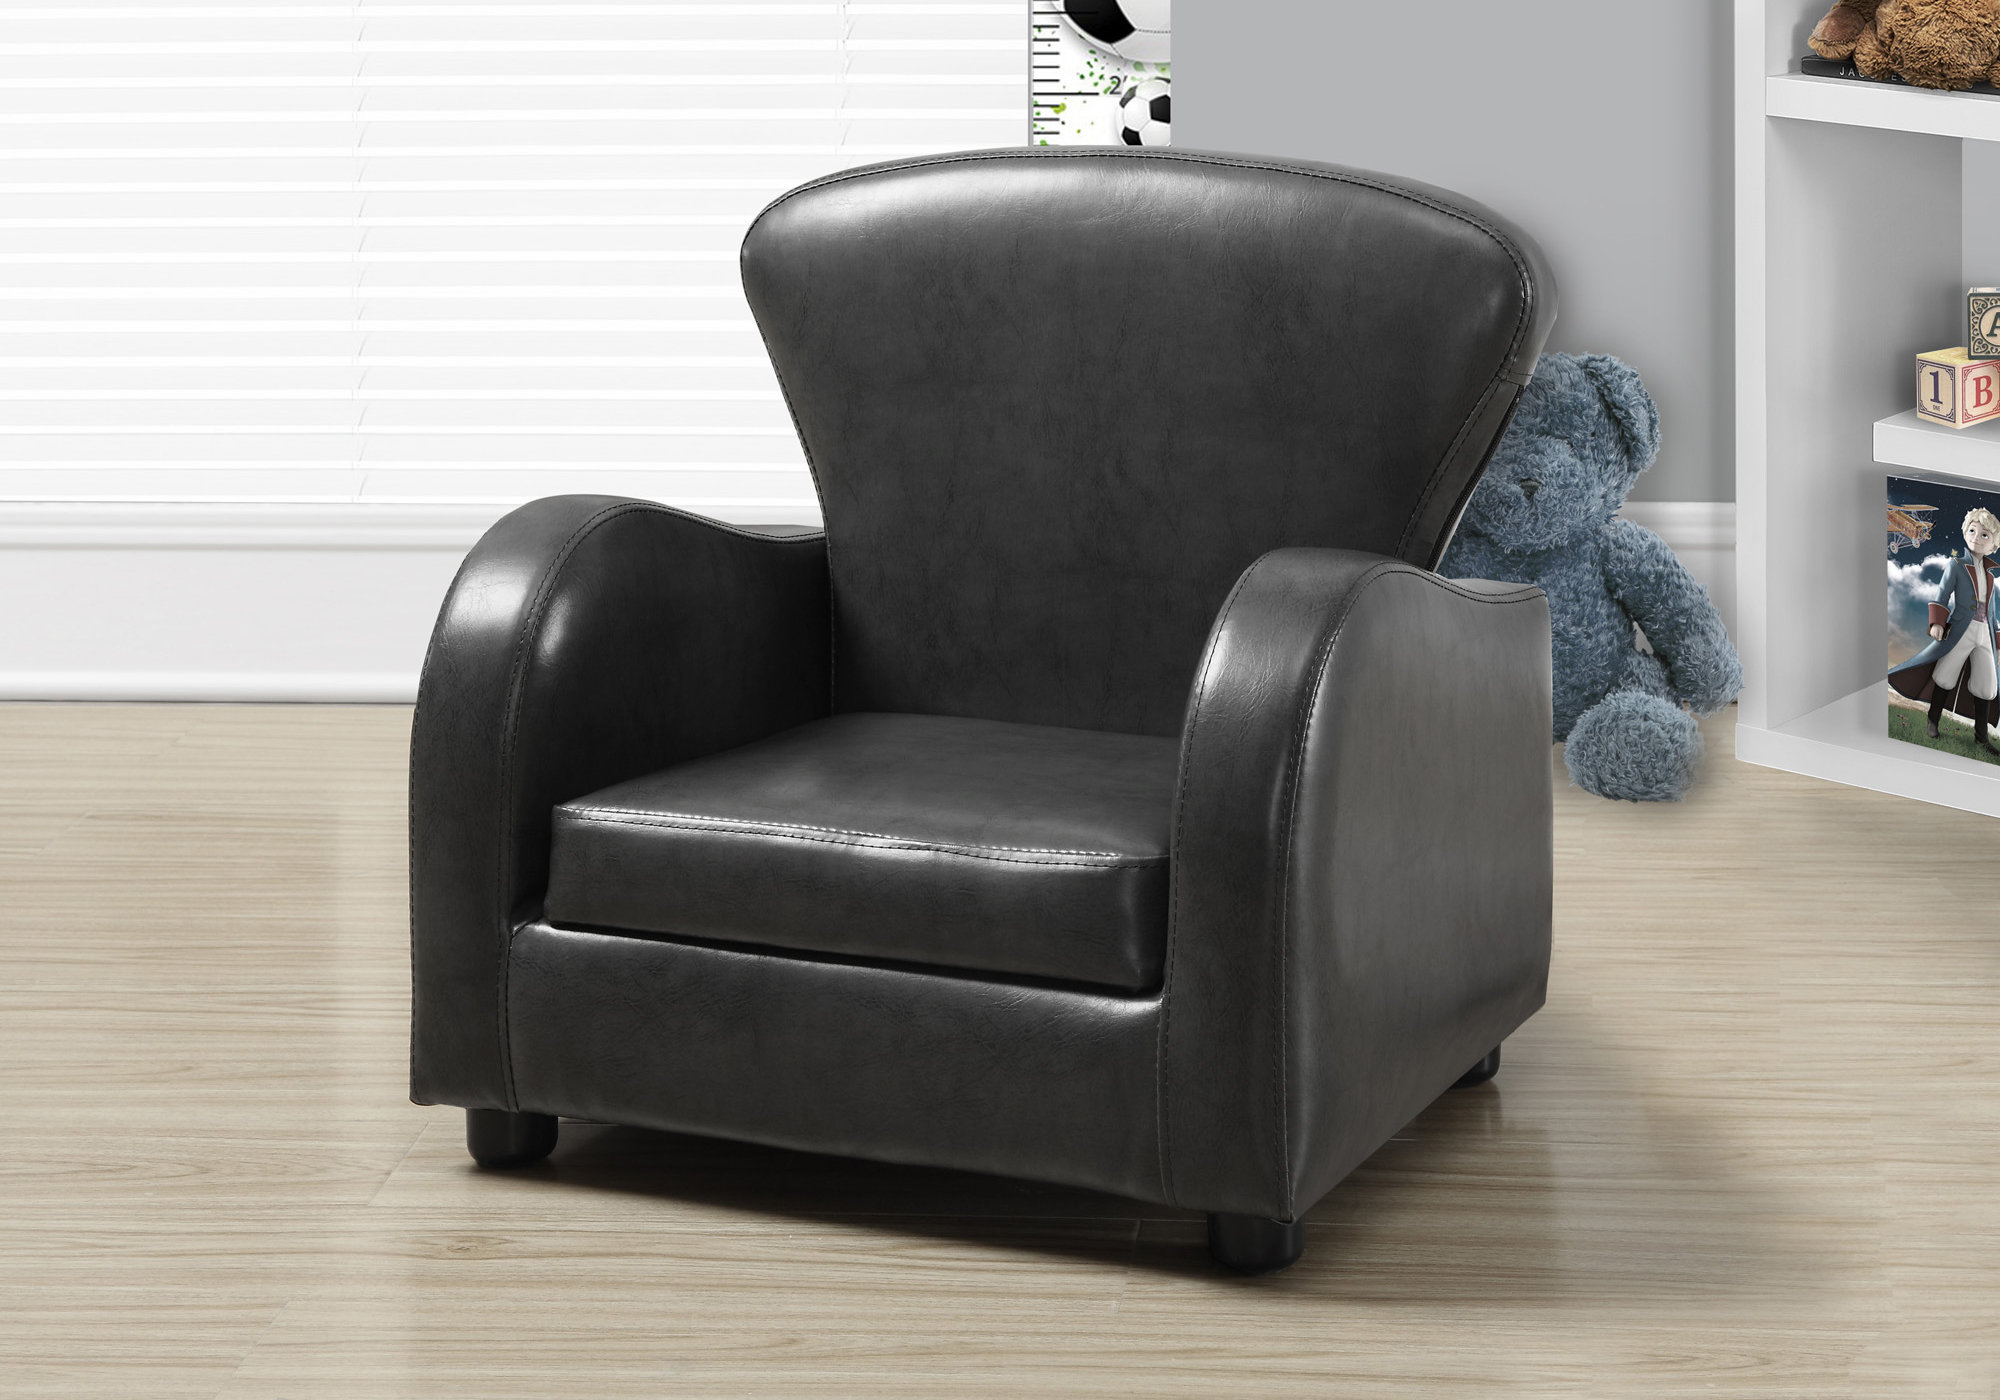 20" Charcoal Grey Leather Look and Solid Wood Foam Chair